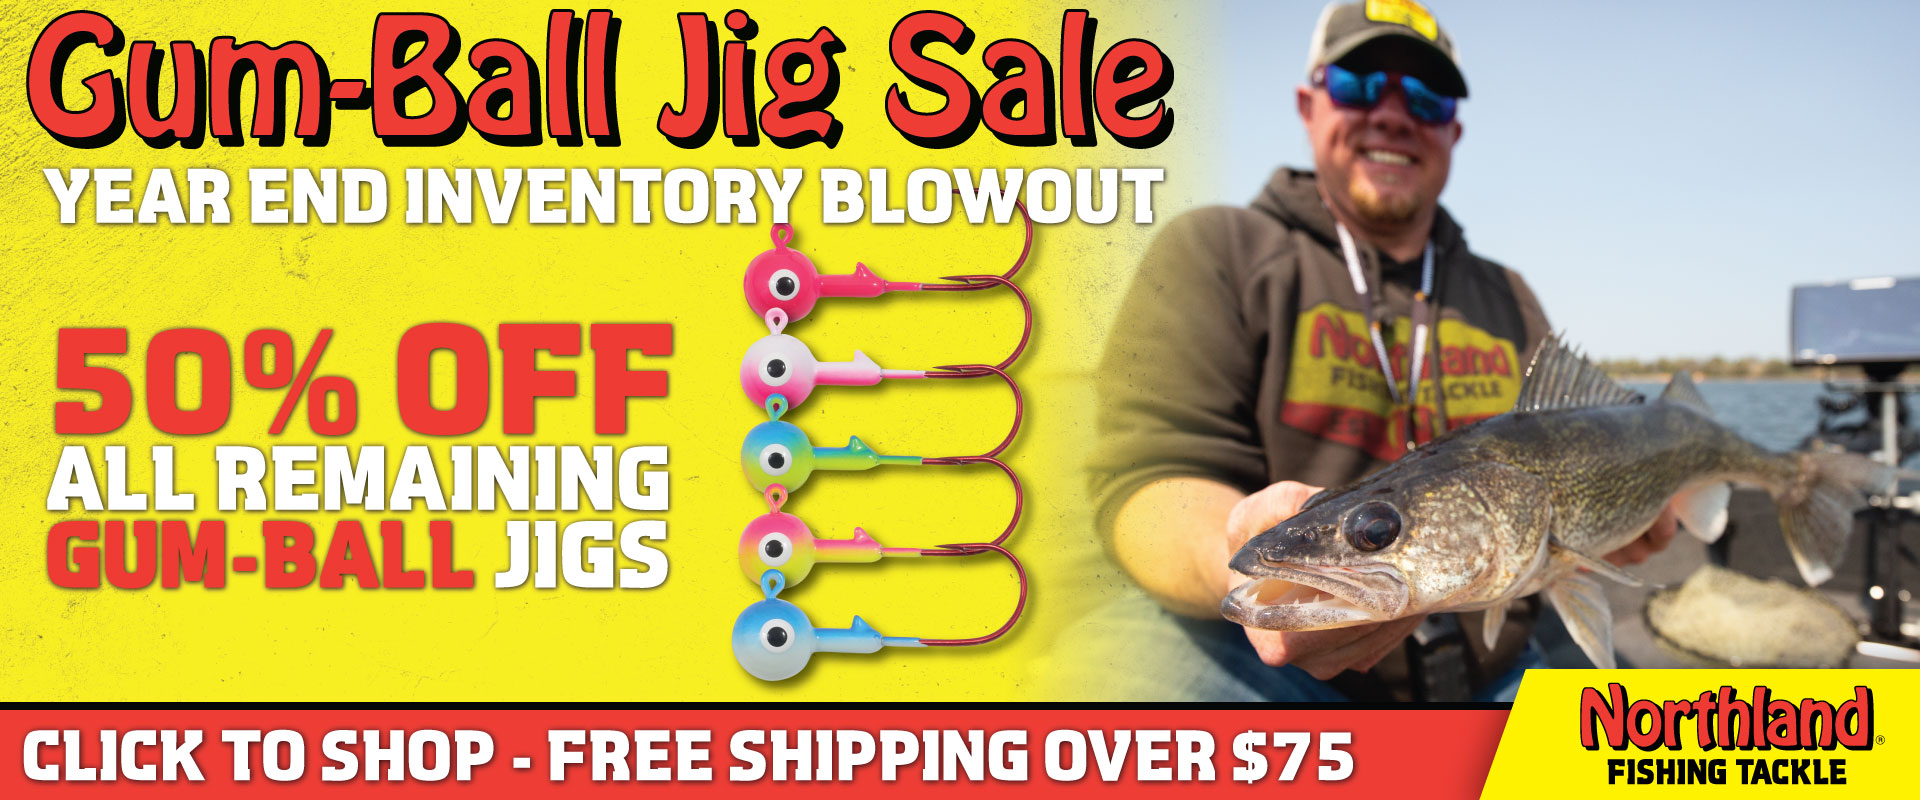 Northland Fishing Tackle Gum-Ball Jig blowout inventory sale 50% off.